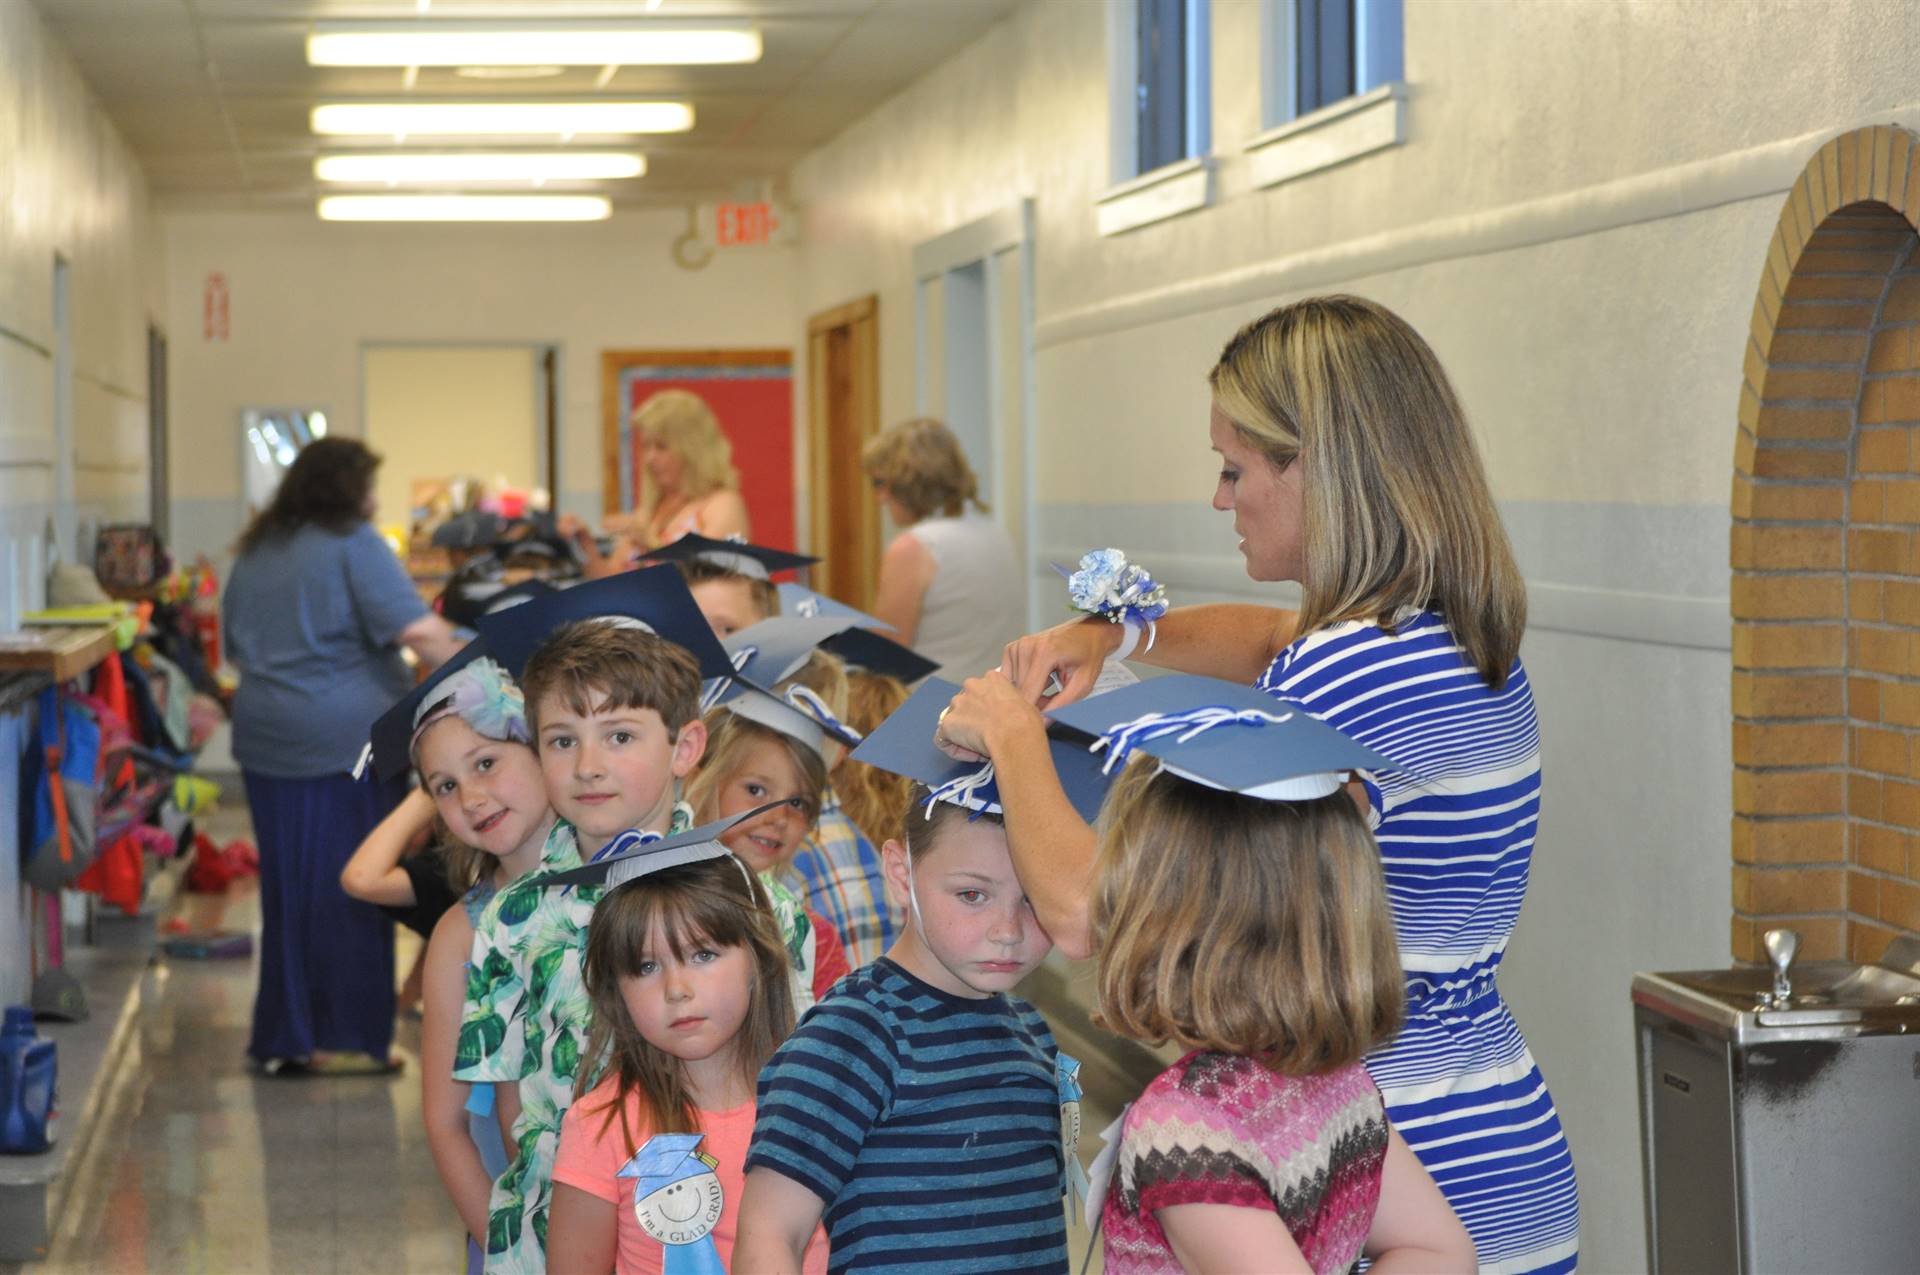 Teachers put graduation hats on first graders lined up in hallway.